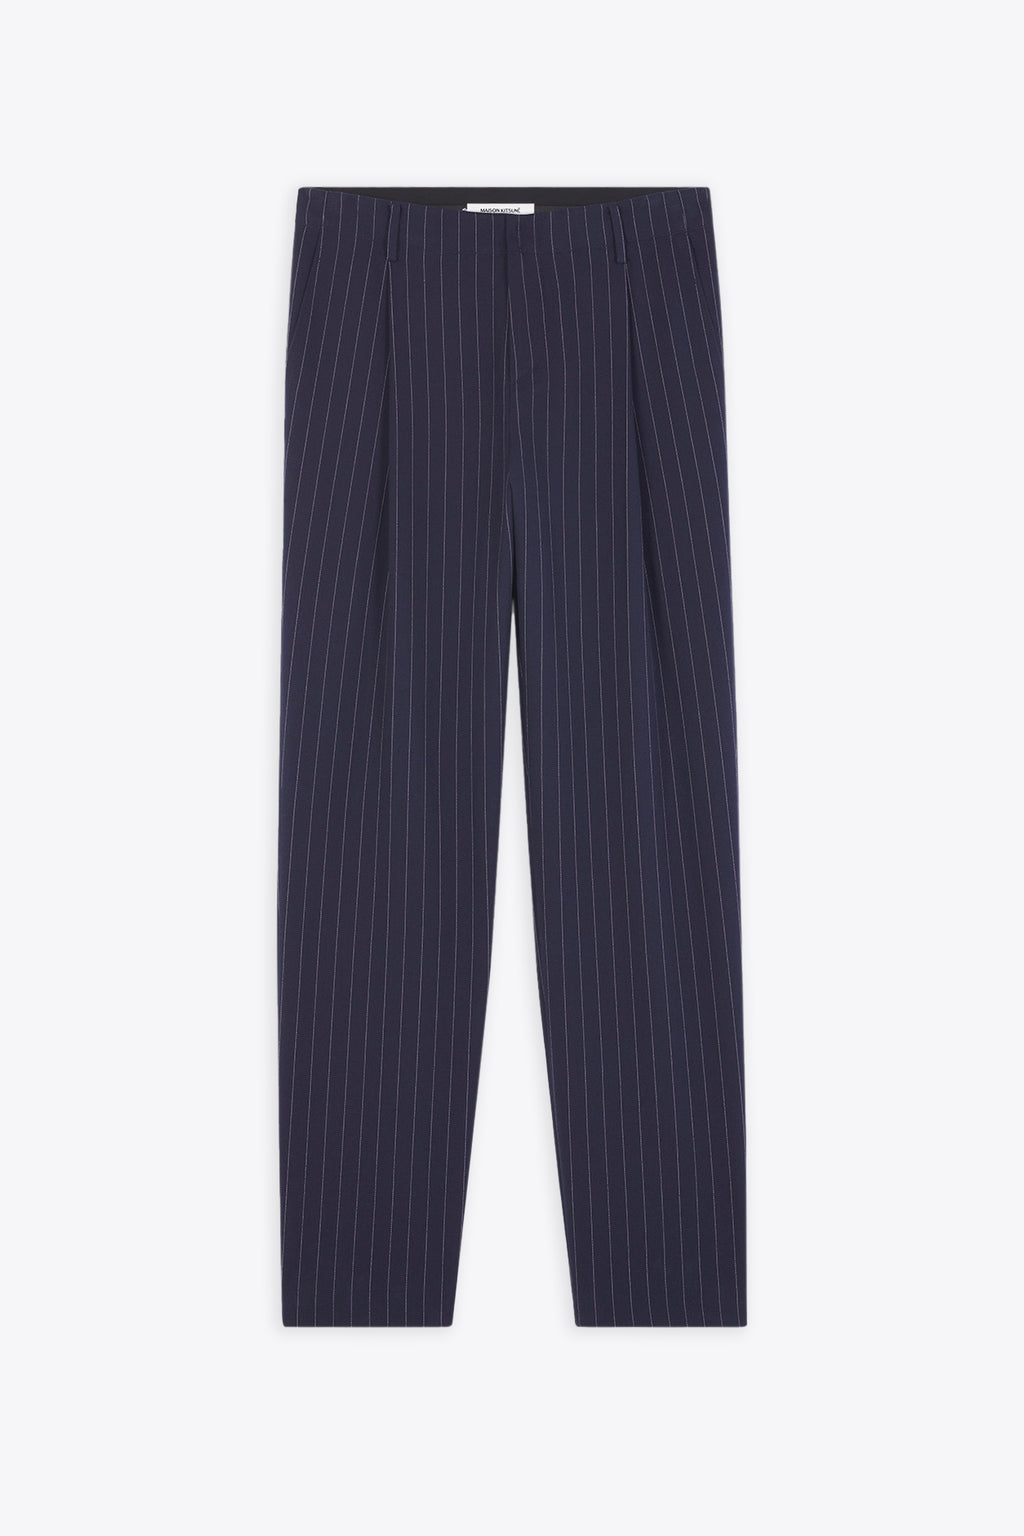 alt-image__Navy-blue-pinstriped-pleated-pants---Tailored-Pleated-Pants